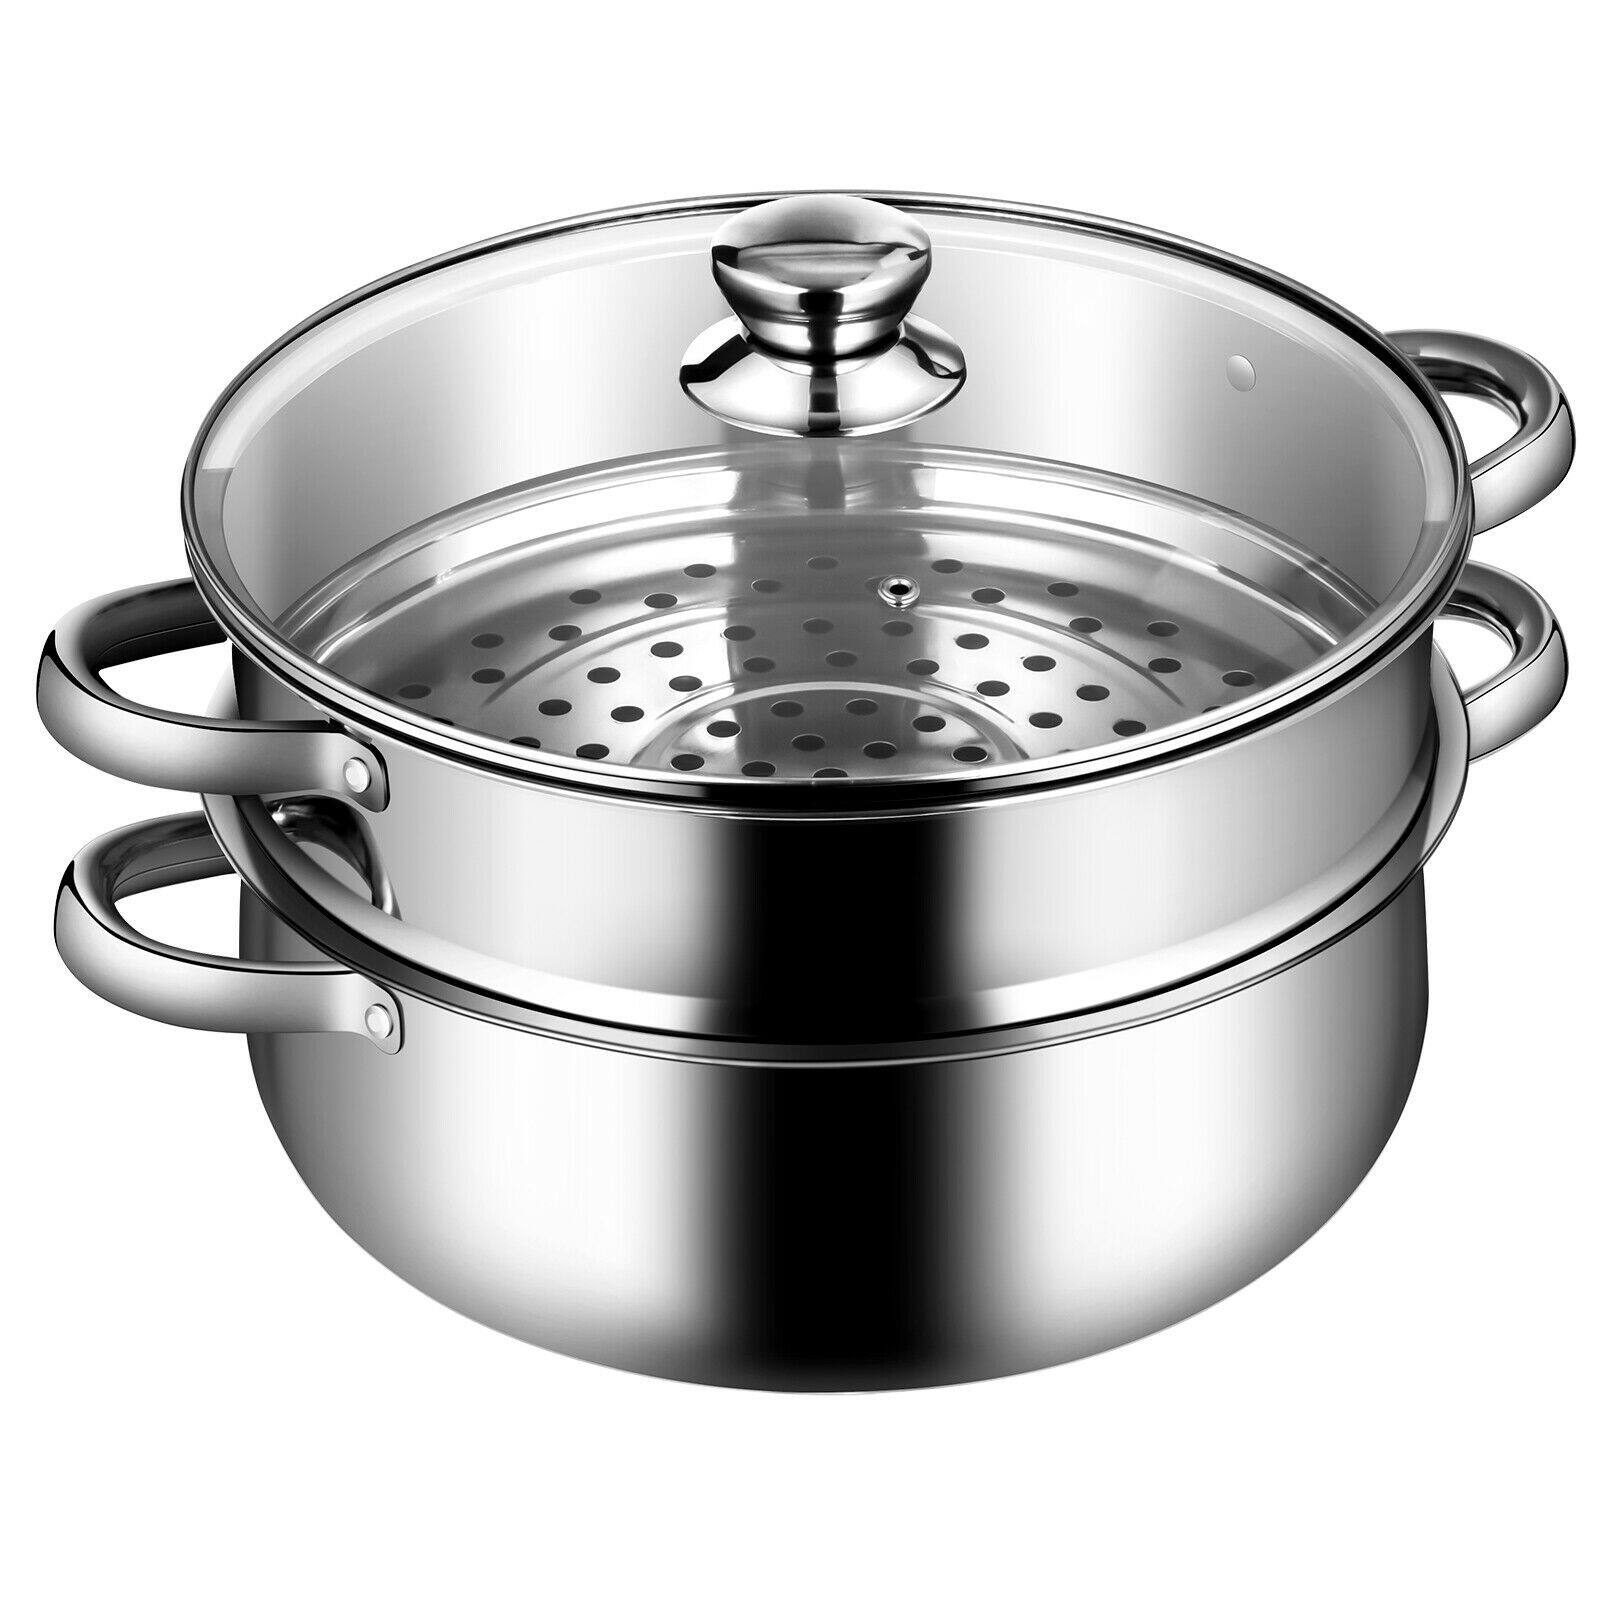 Costway 9.5 QT 2 Tier Stainless Steel Steamer for $27 + Free Shipping